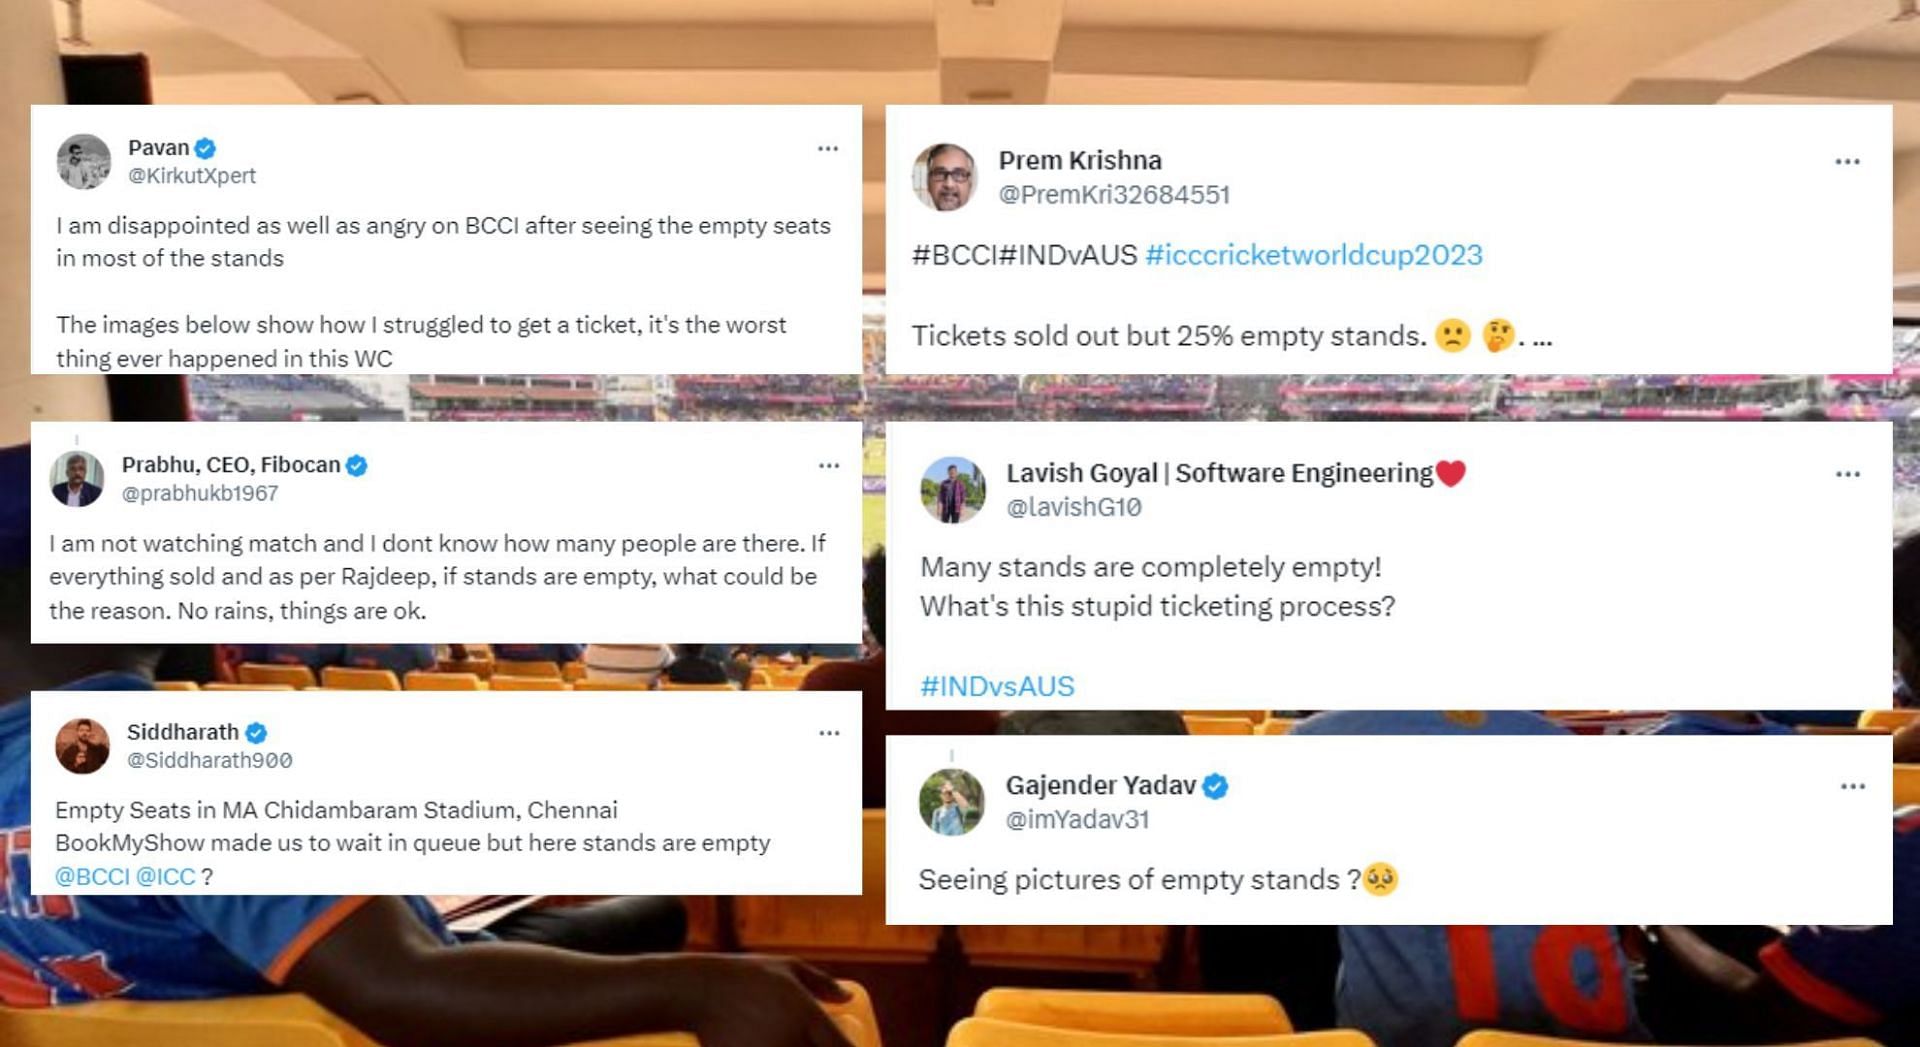 Fans react to empty stands in IND vs AUS 2023 match